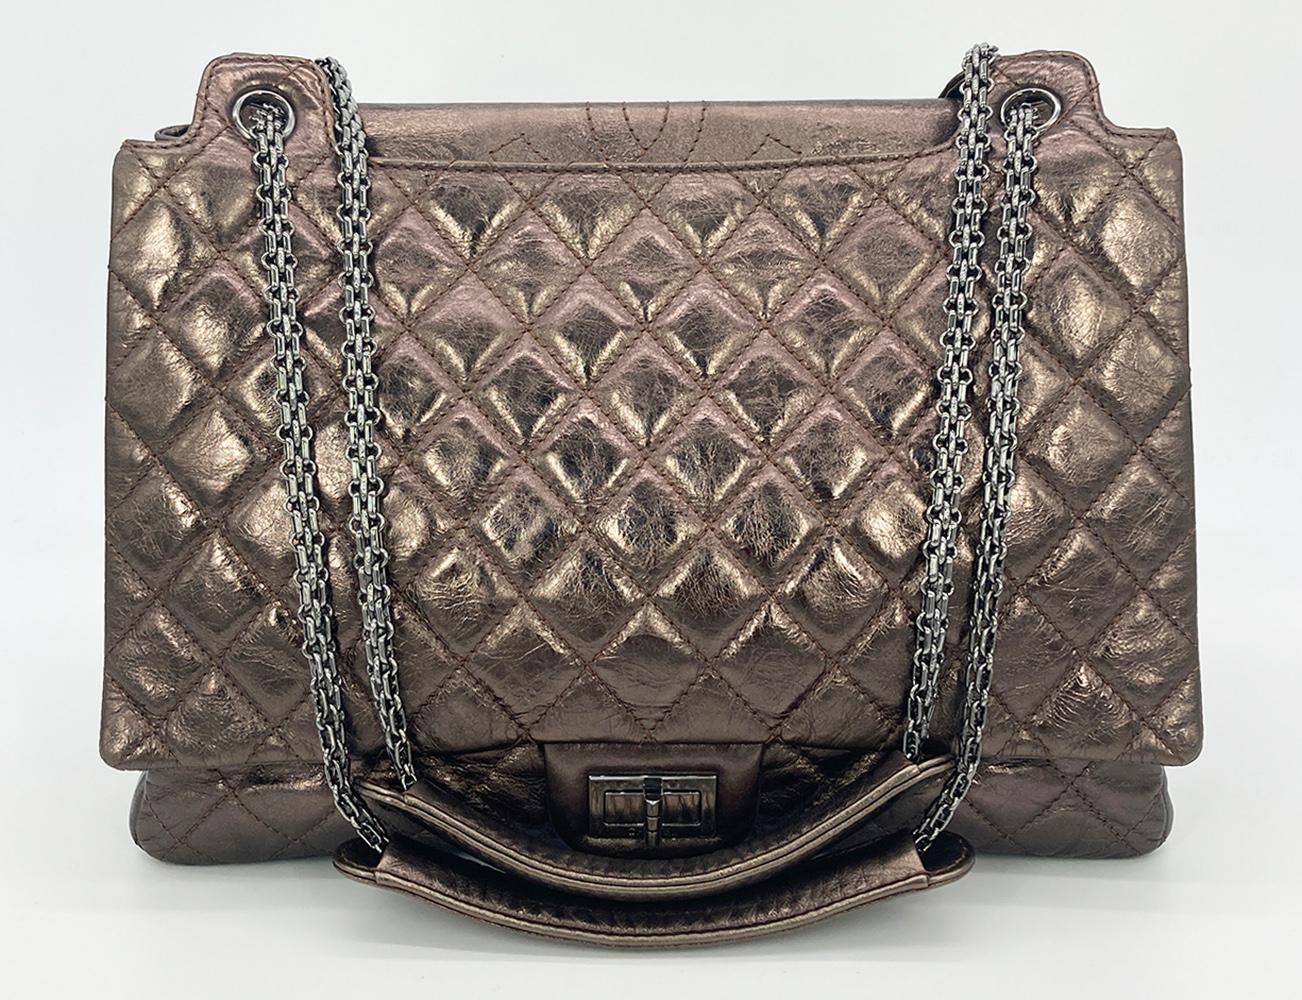 Chanel Metallic Bronze Quilted Leather Classic Flap Shopping Tote In Excellent Condition For Sale In Philadelphia, PA